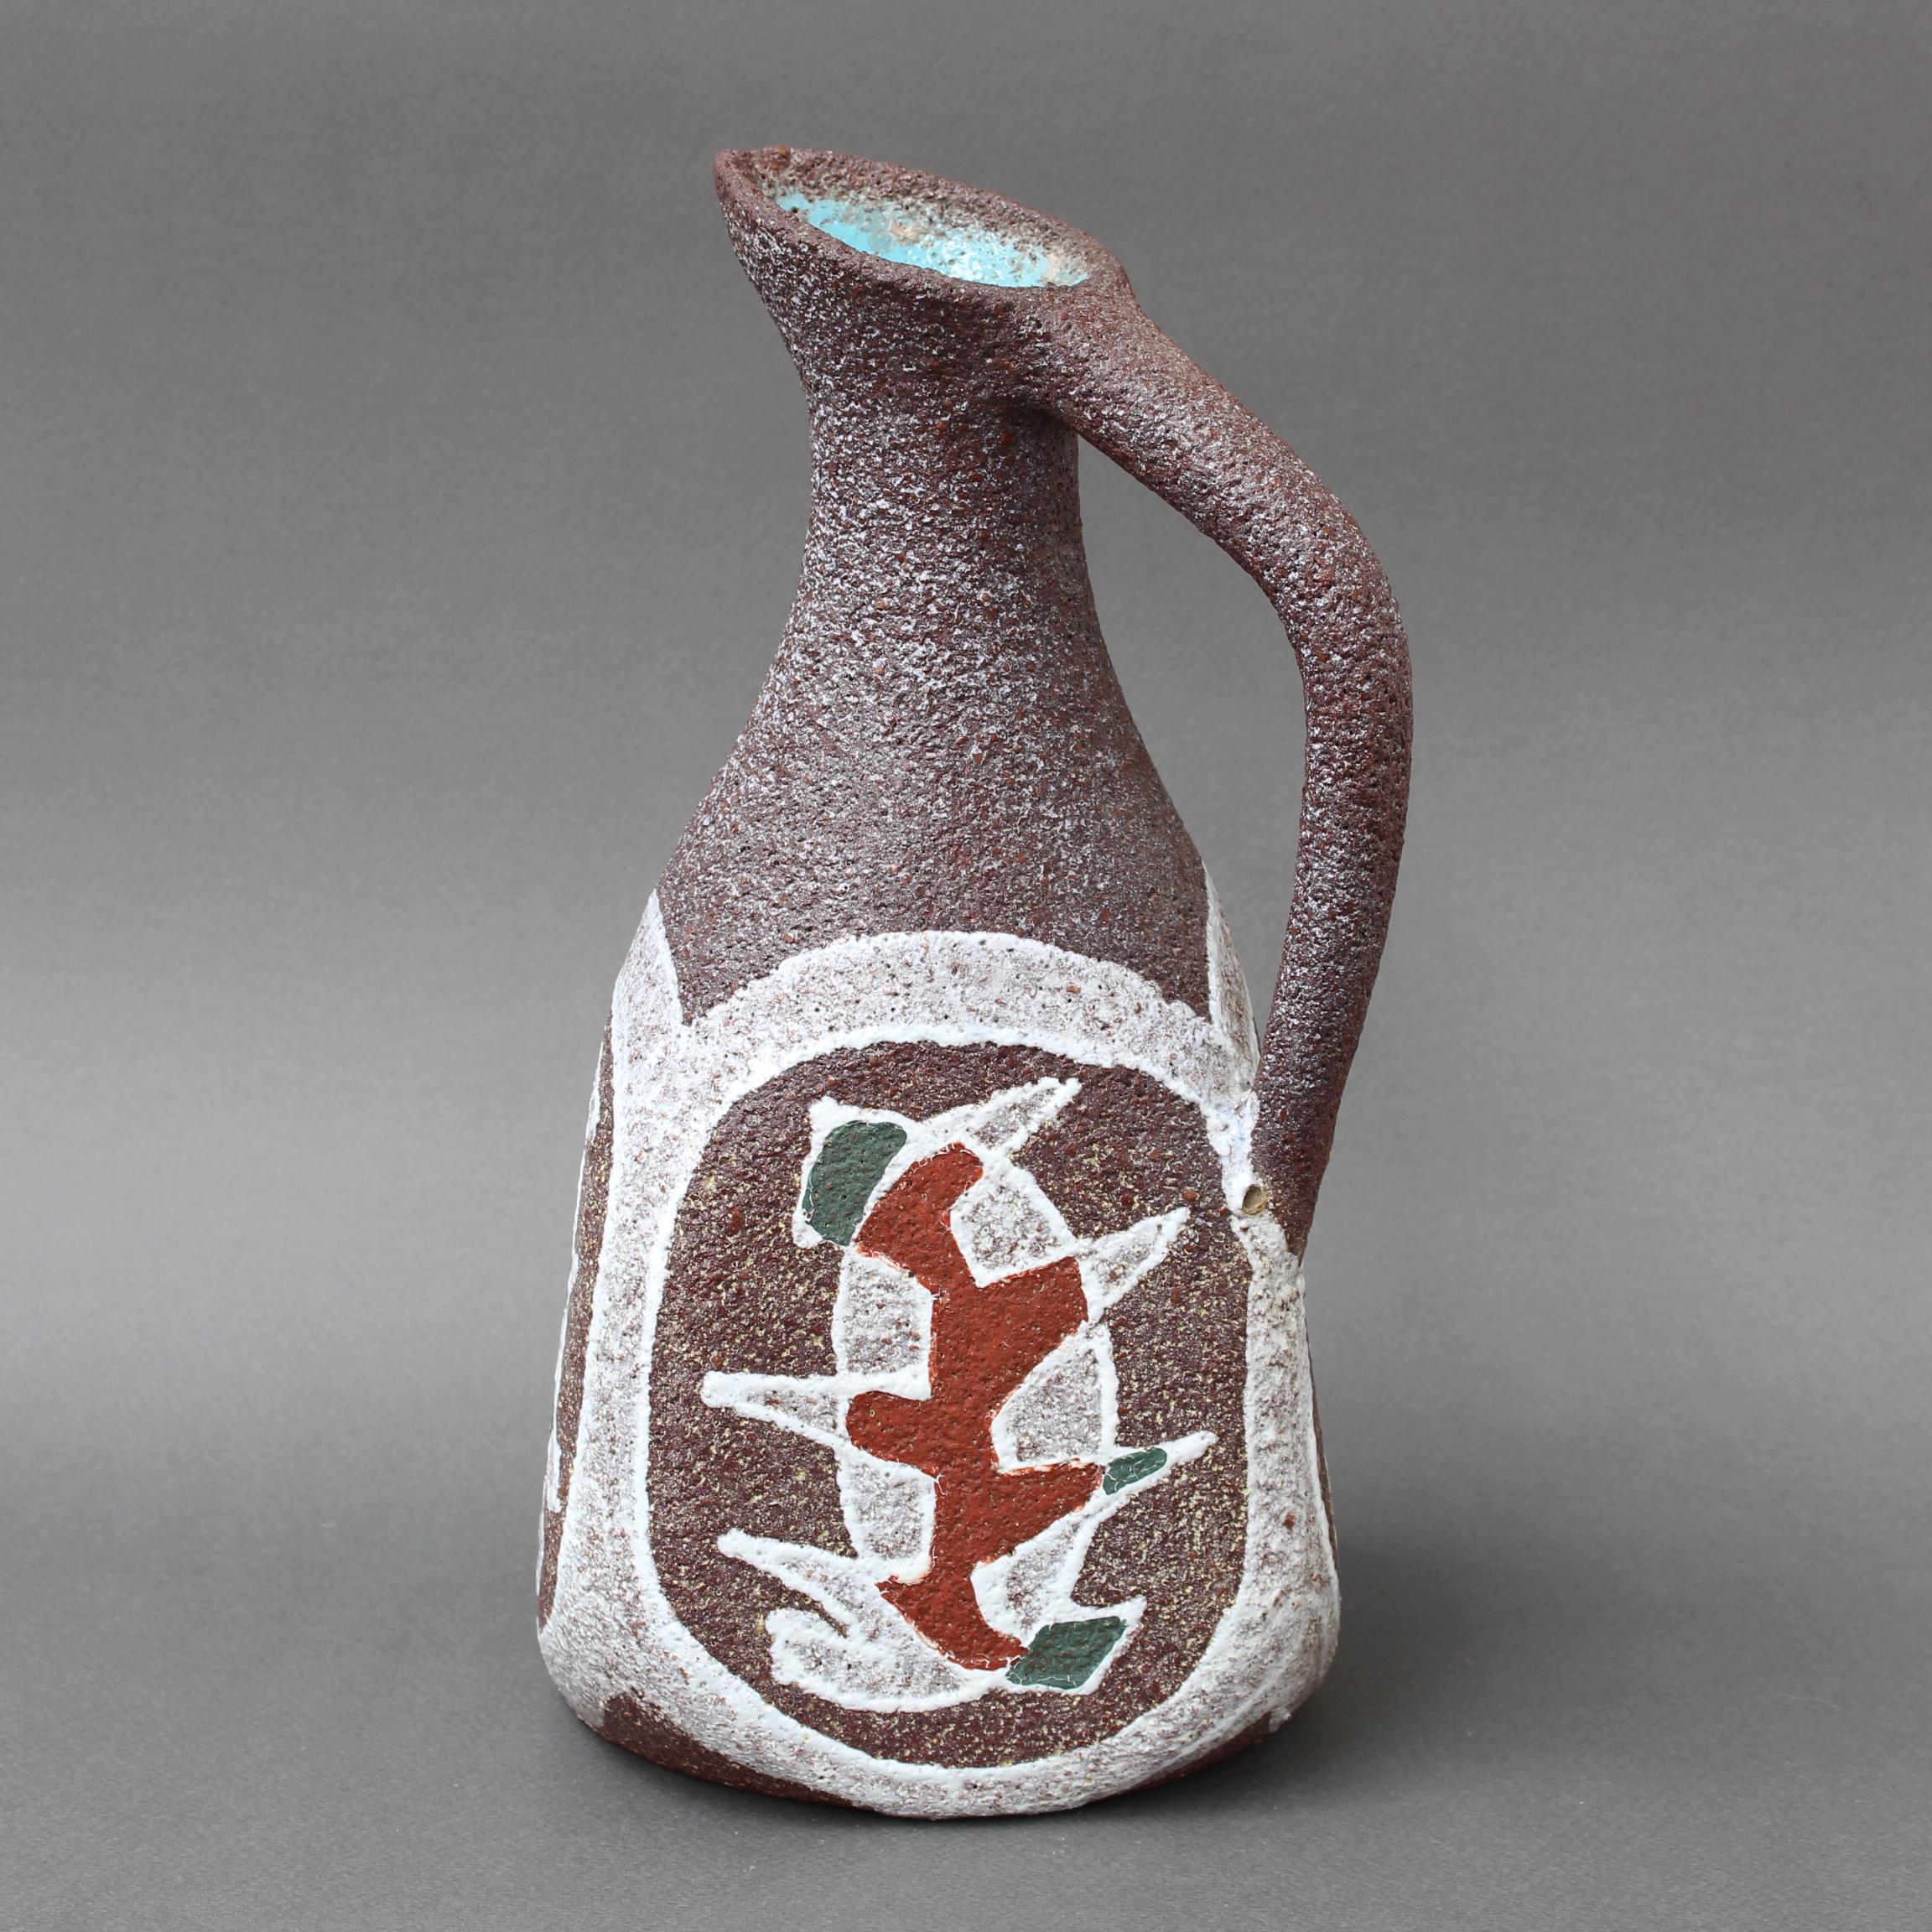 Decorative midcentury ceramic vase / pitcher by Accolay (circa 1960s). A classically shaped piece from antiquity is reinterpreted in Accolay's unmistakable style. The pitcher has soft, sensuous curves and a long, graceful handle. The decoration is